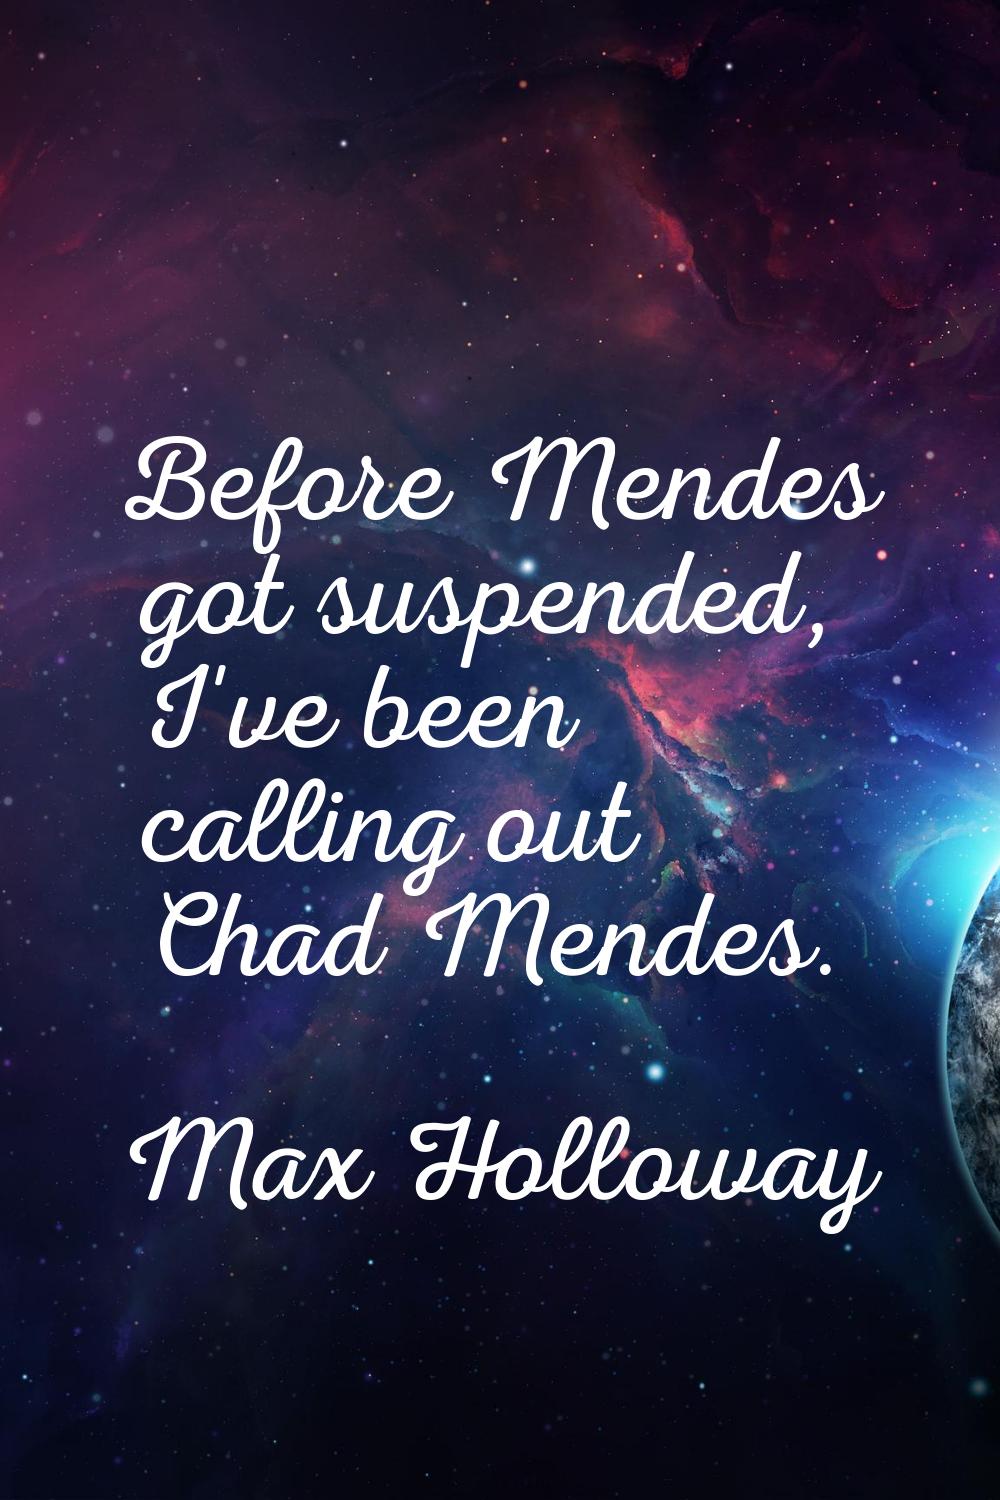 Before Mendes got suspended, I've been calling out Chad Mendes.